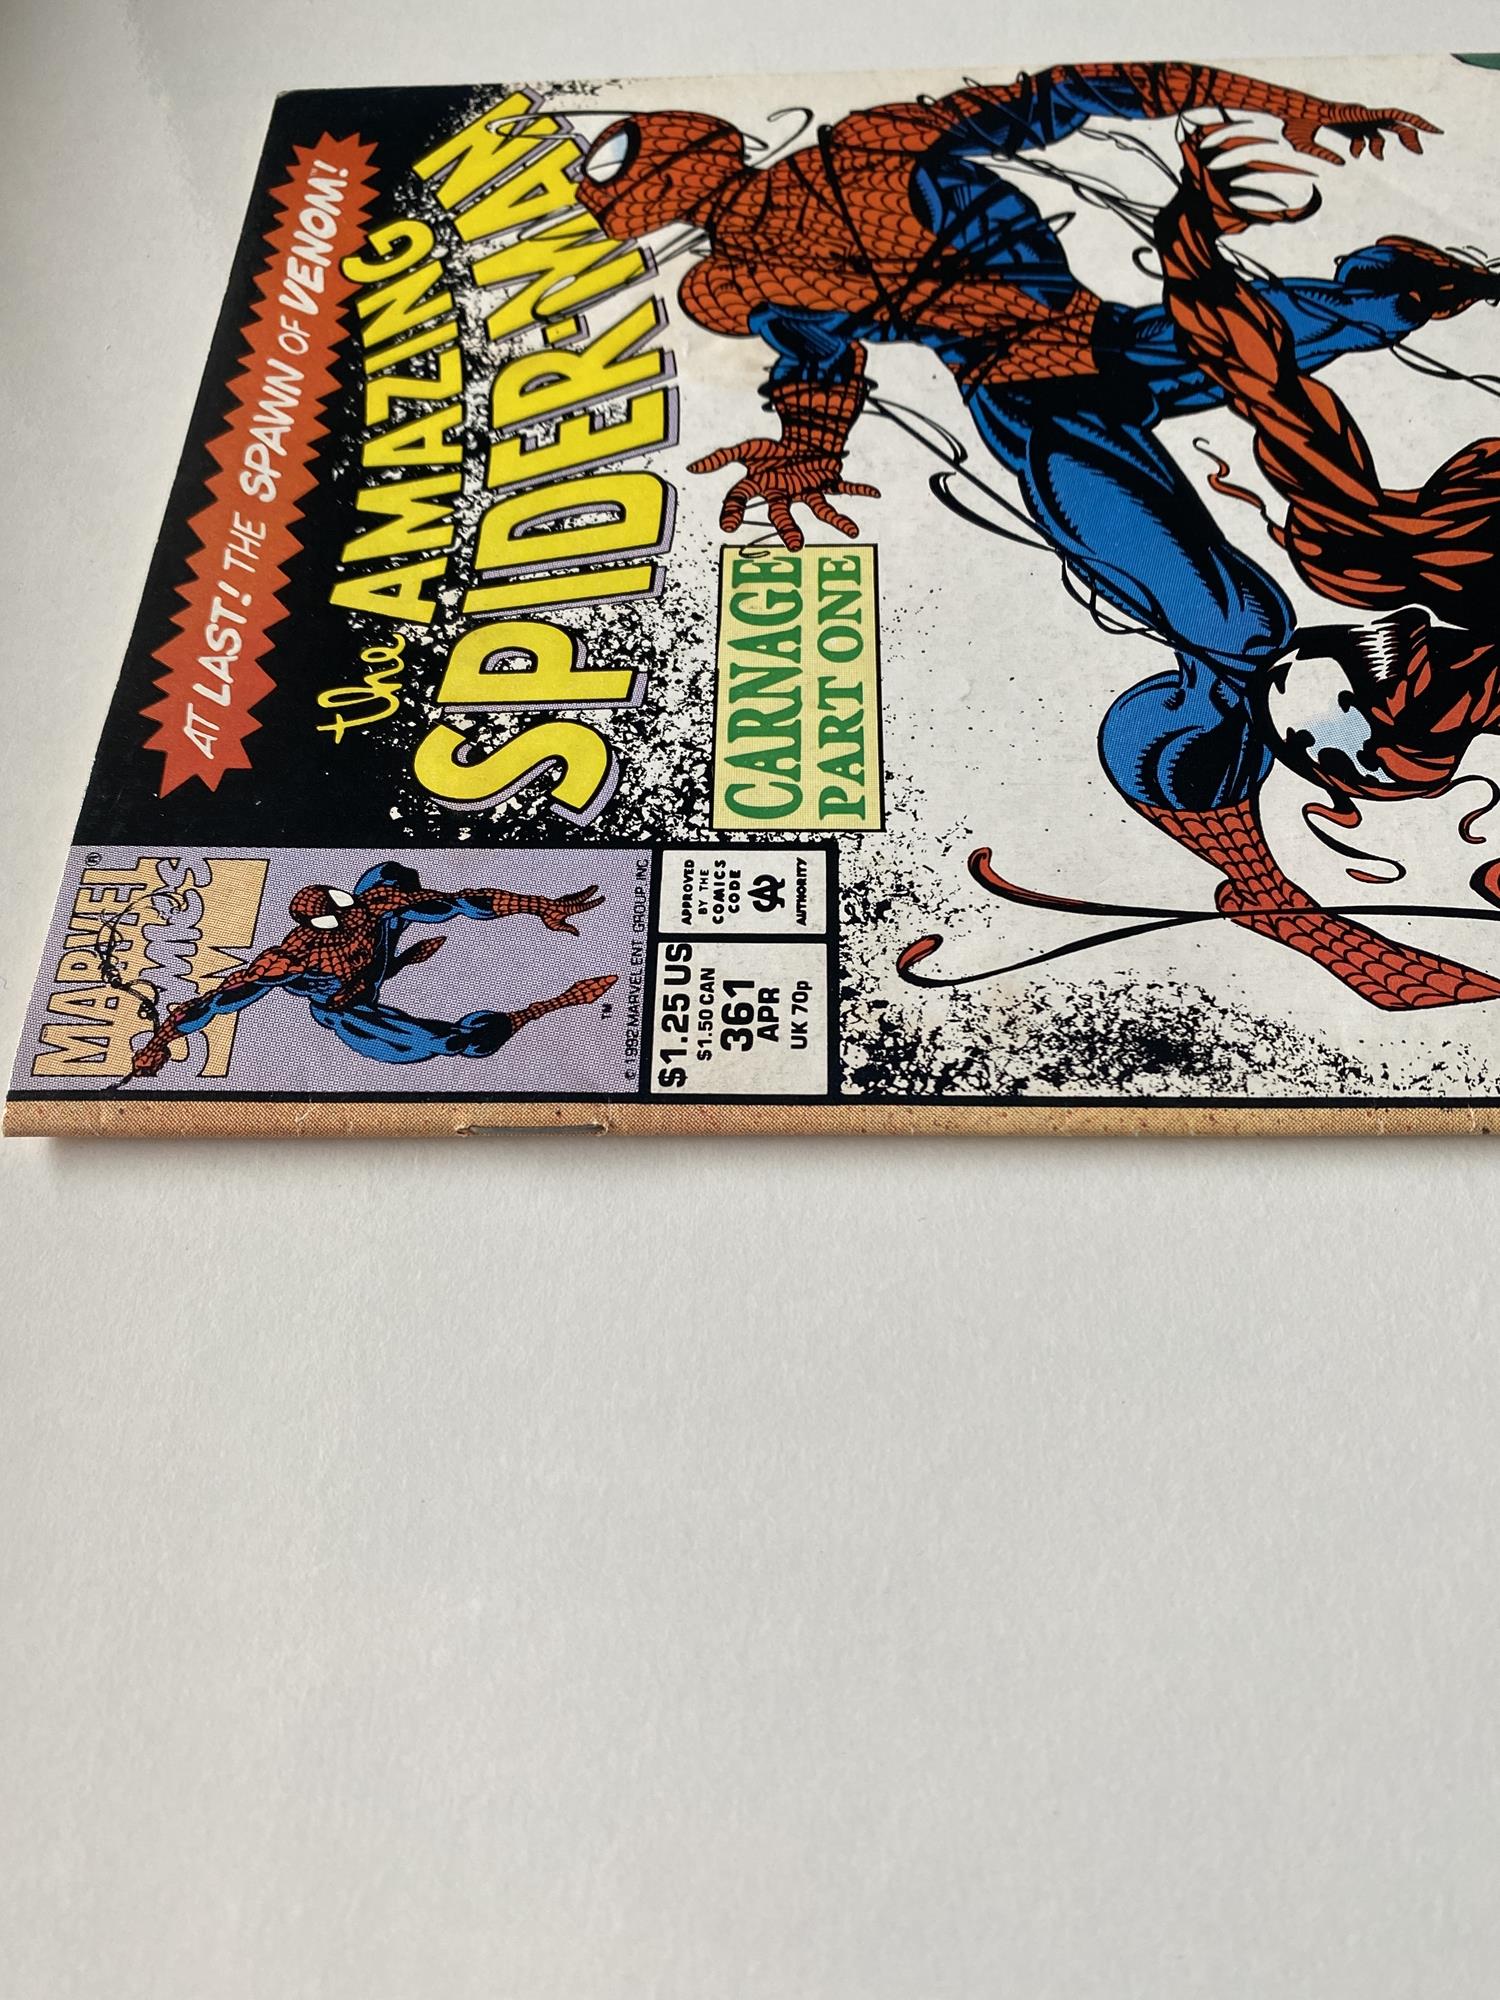 AMAZING SPIDER-MAN # 361 (1992 - MARVEL - Cents/Pence Copy) - First full appearance of Carnage ( - Image 6 of 7